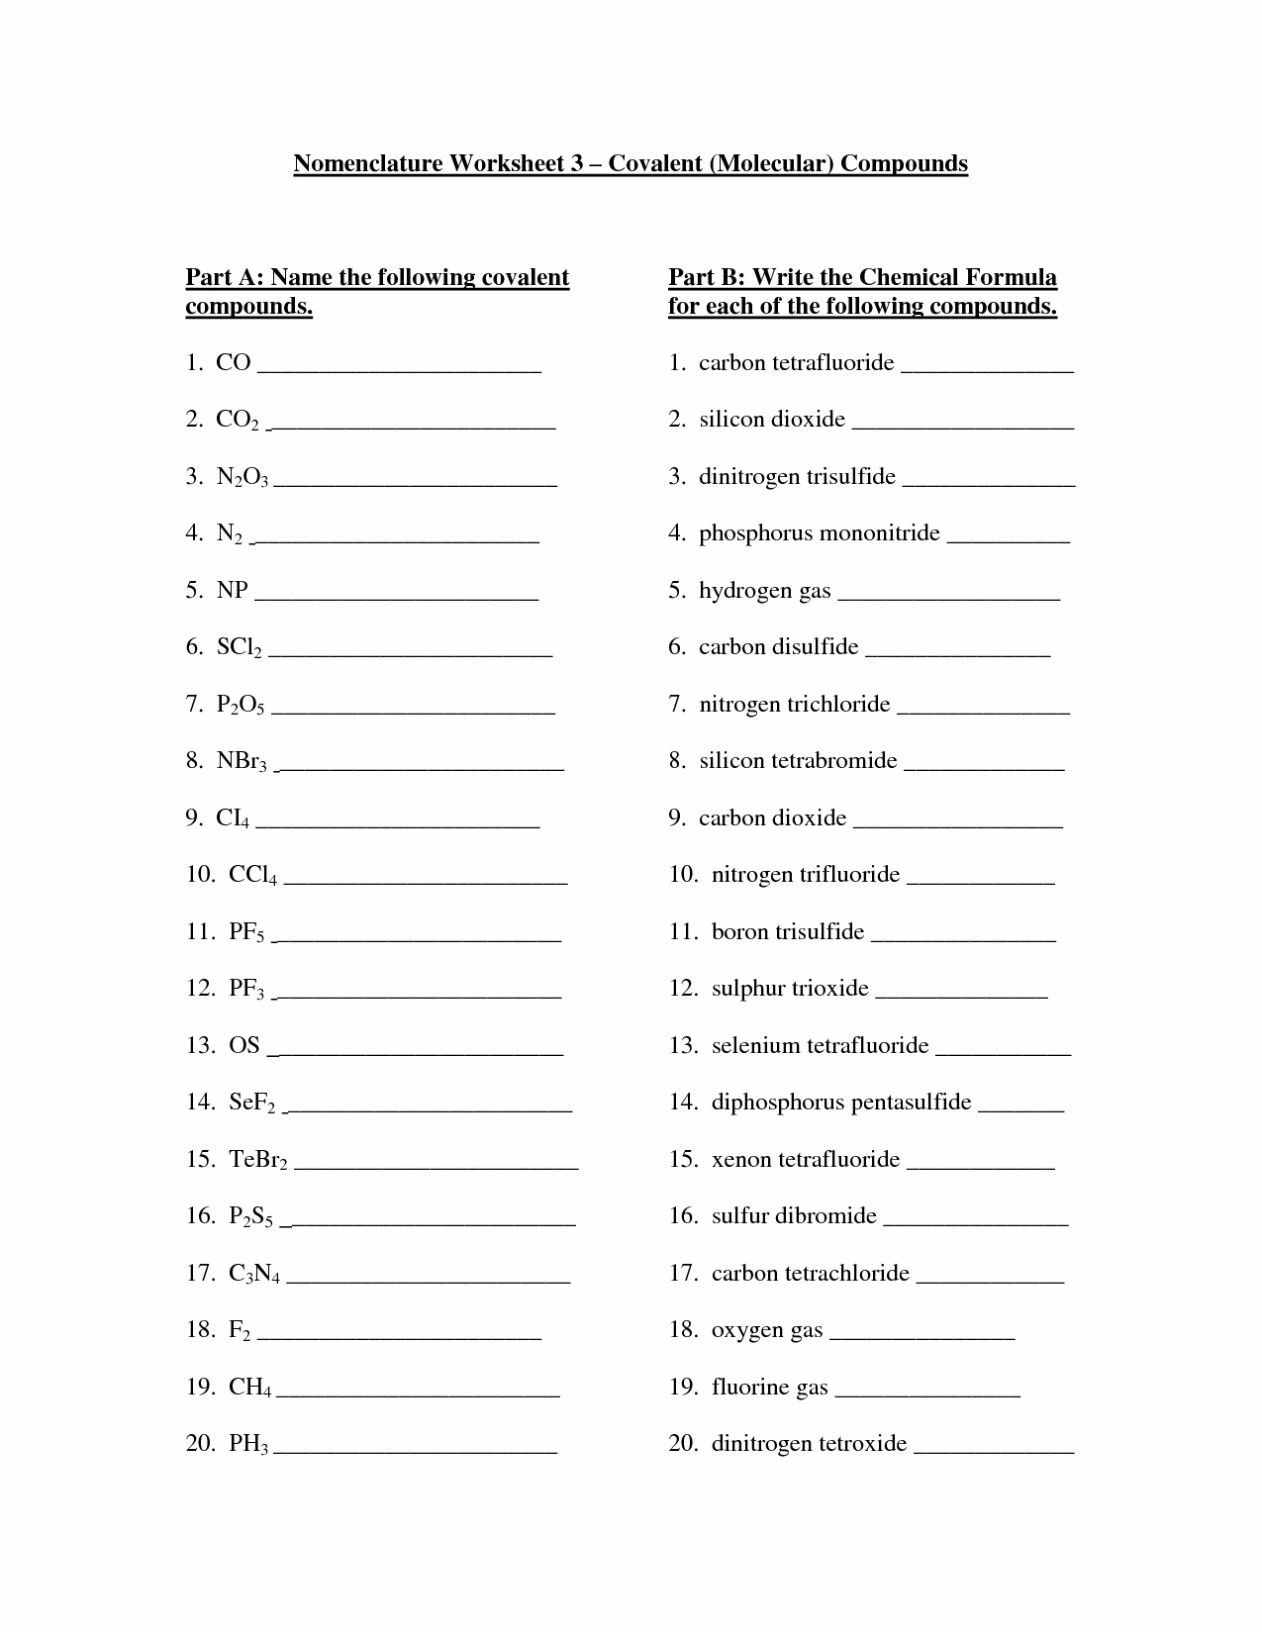 Molecules and Compounds Worksheet Naming Binary Molecular Pounds Worksheet 3 Answers